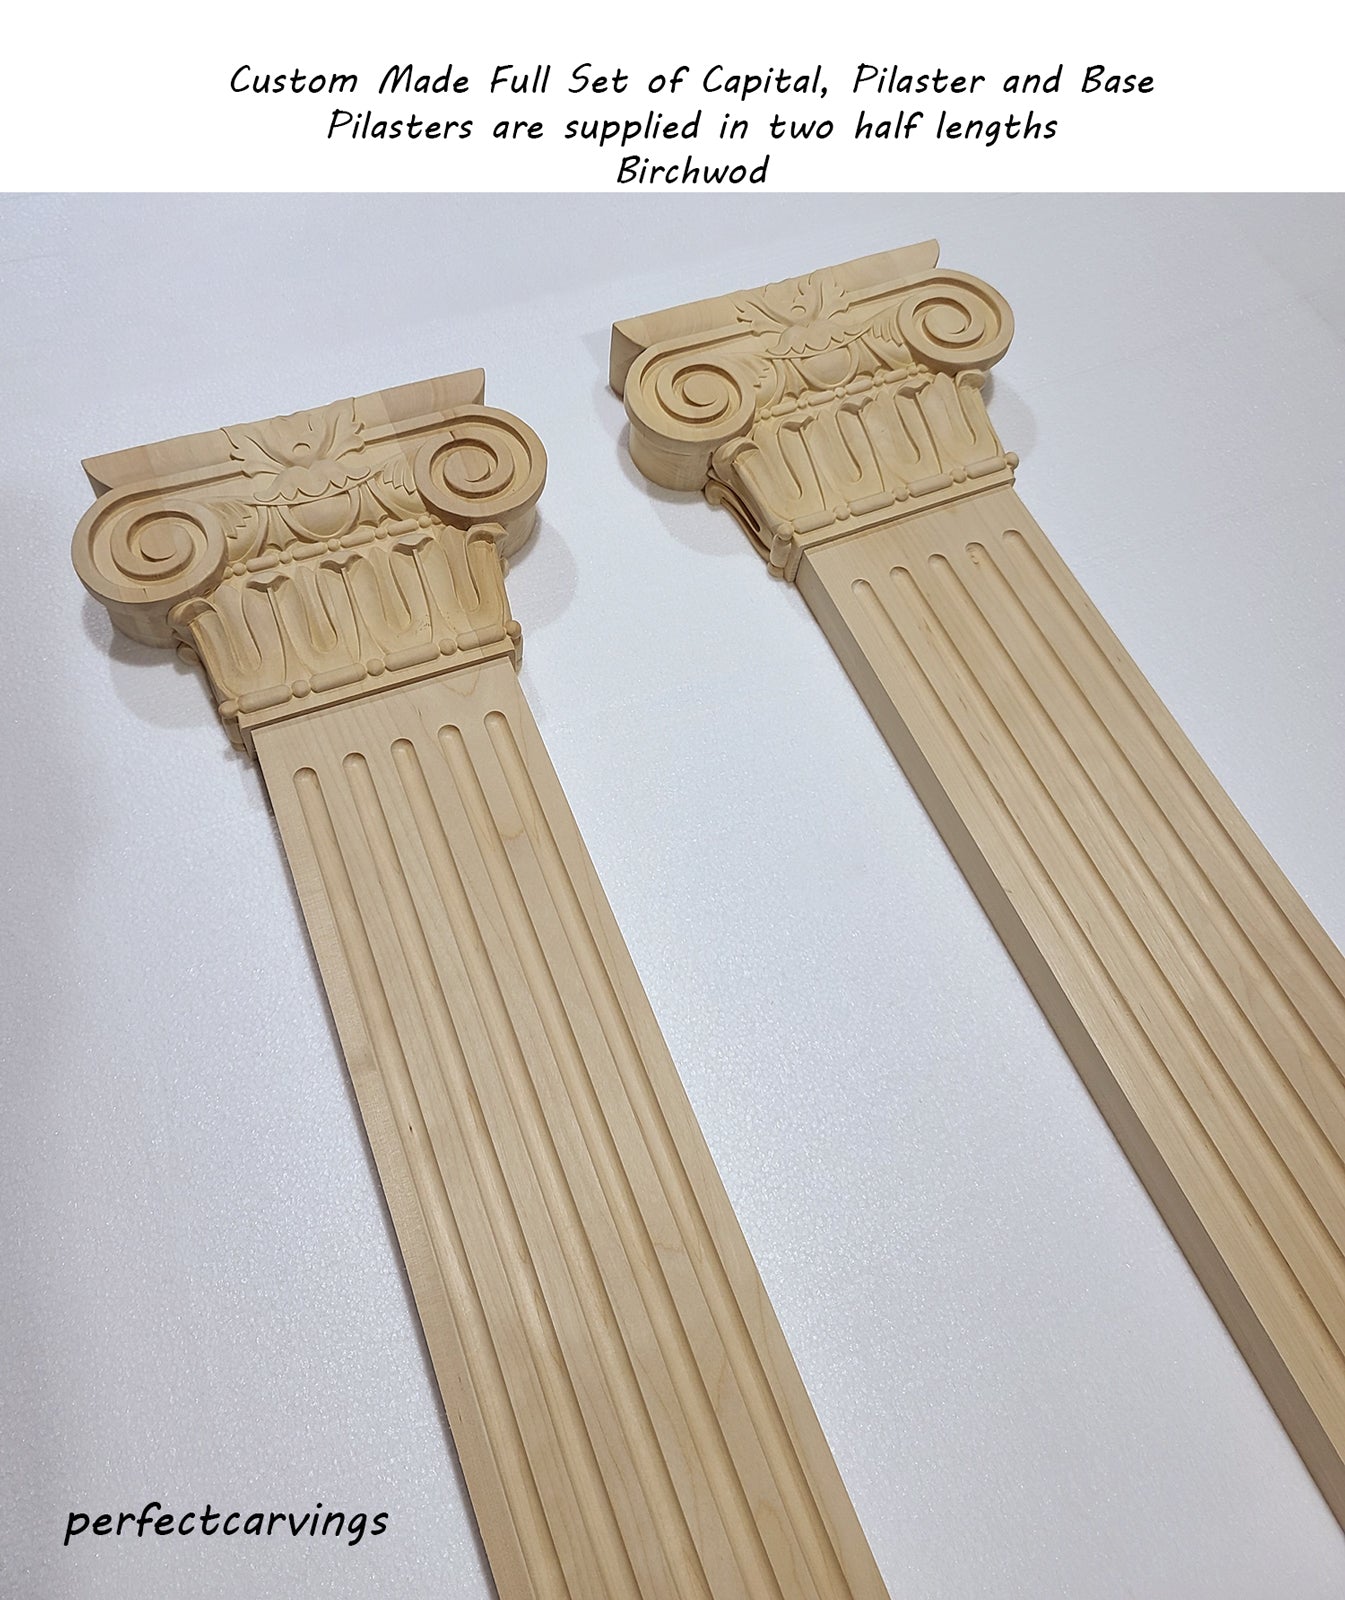 PAIR of Wood Carved Roman Capitals for 4"Wx1"D Pilaster Columns